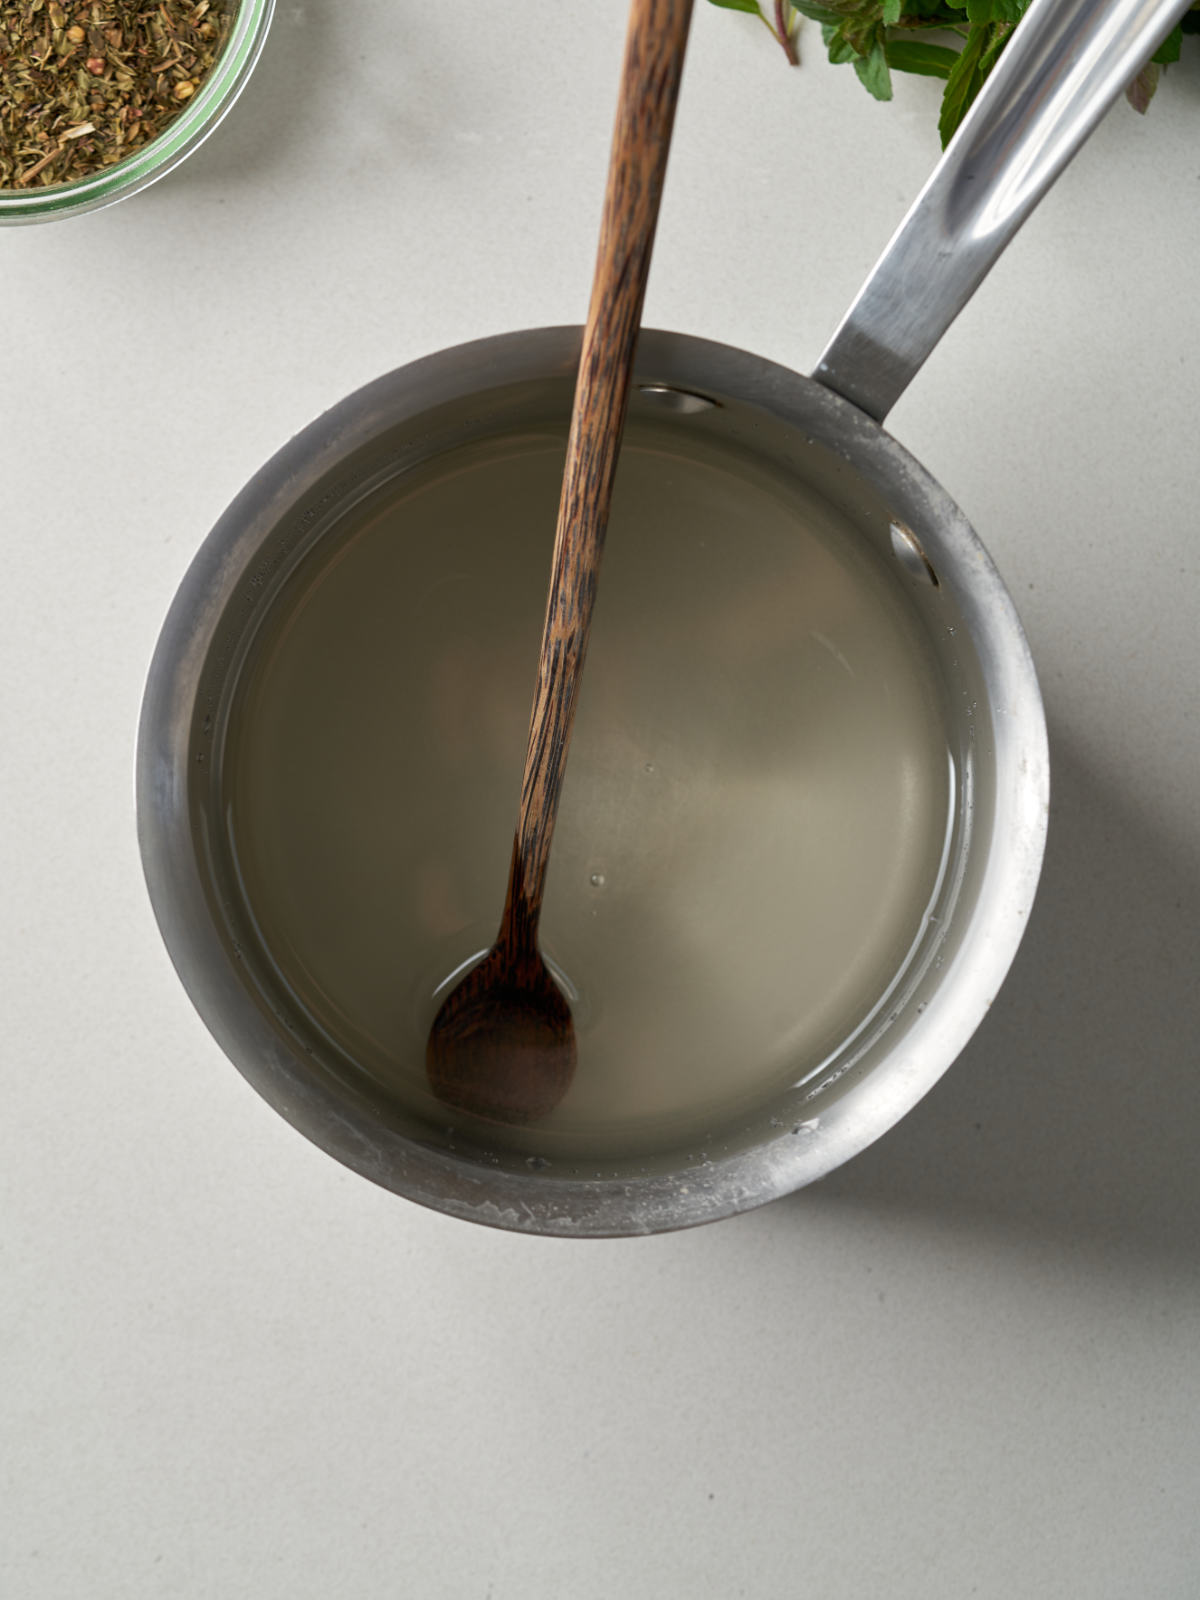 Simple syrup in a saucepan with a skinny wooden spoon.